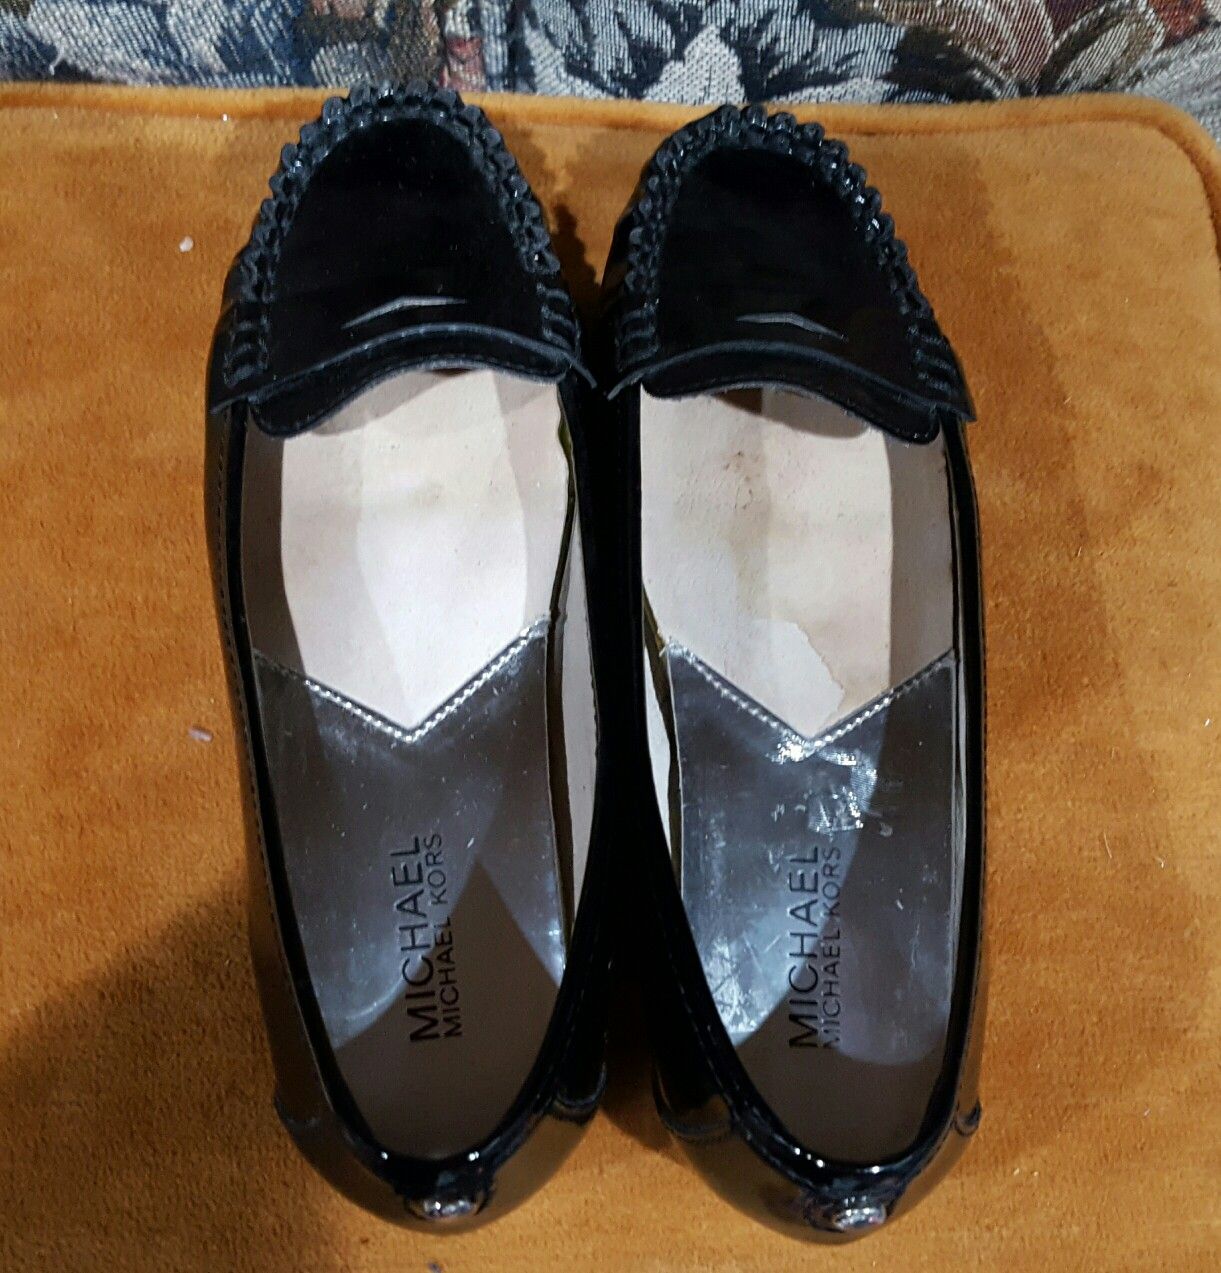 Michael Kors black penny loafer style shoes